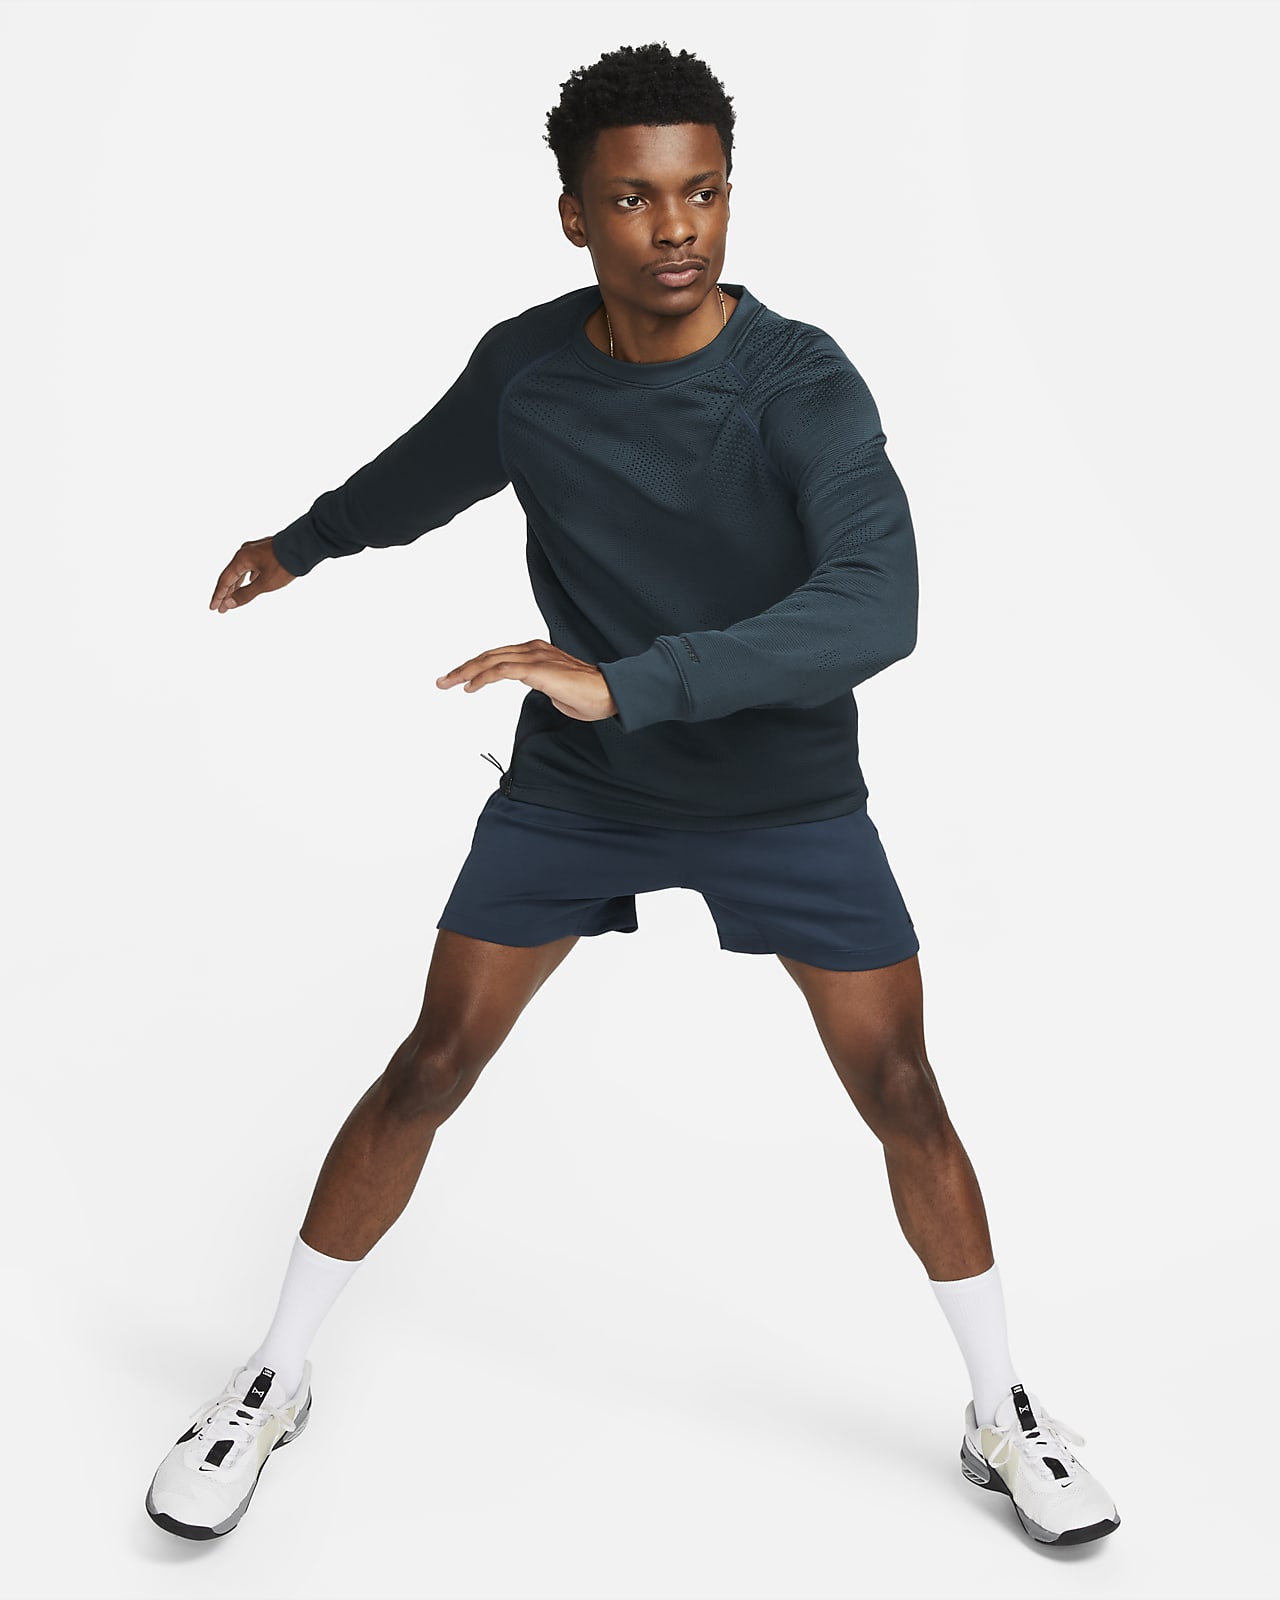 Nike Therma-FIT ADV A.P.S. Men's Fleece Fitness Trousers. Nike AT